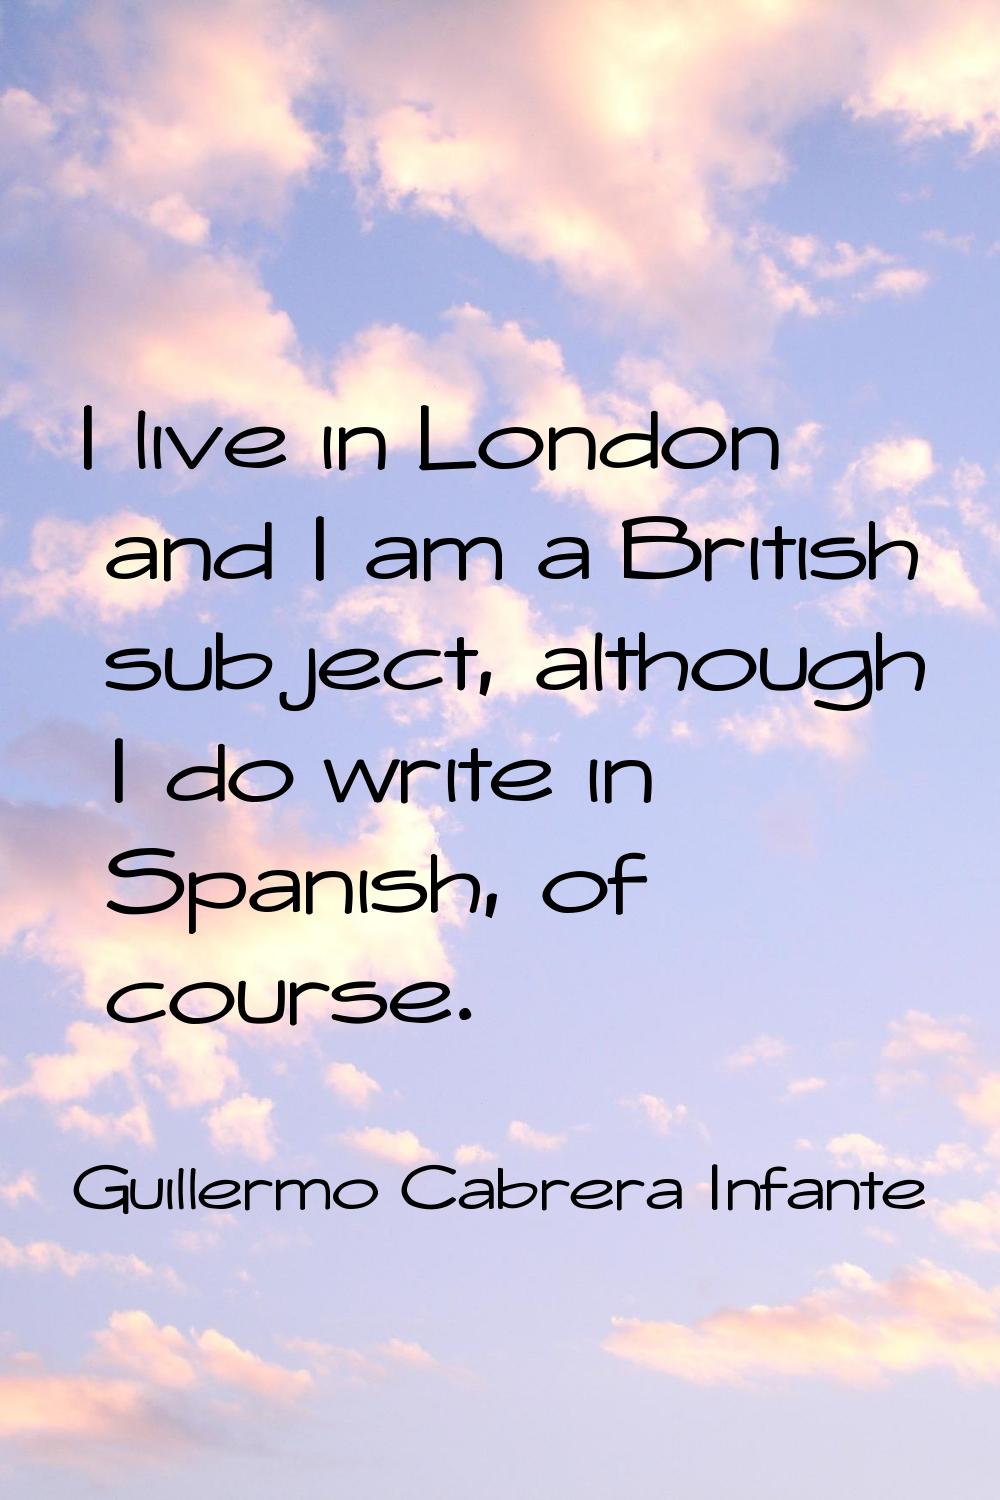 I live in London and I am a British subject, although I do write in Spanish, of course.